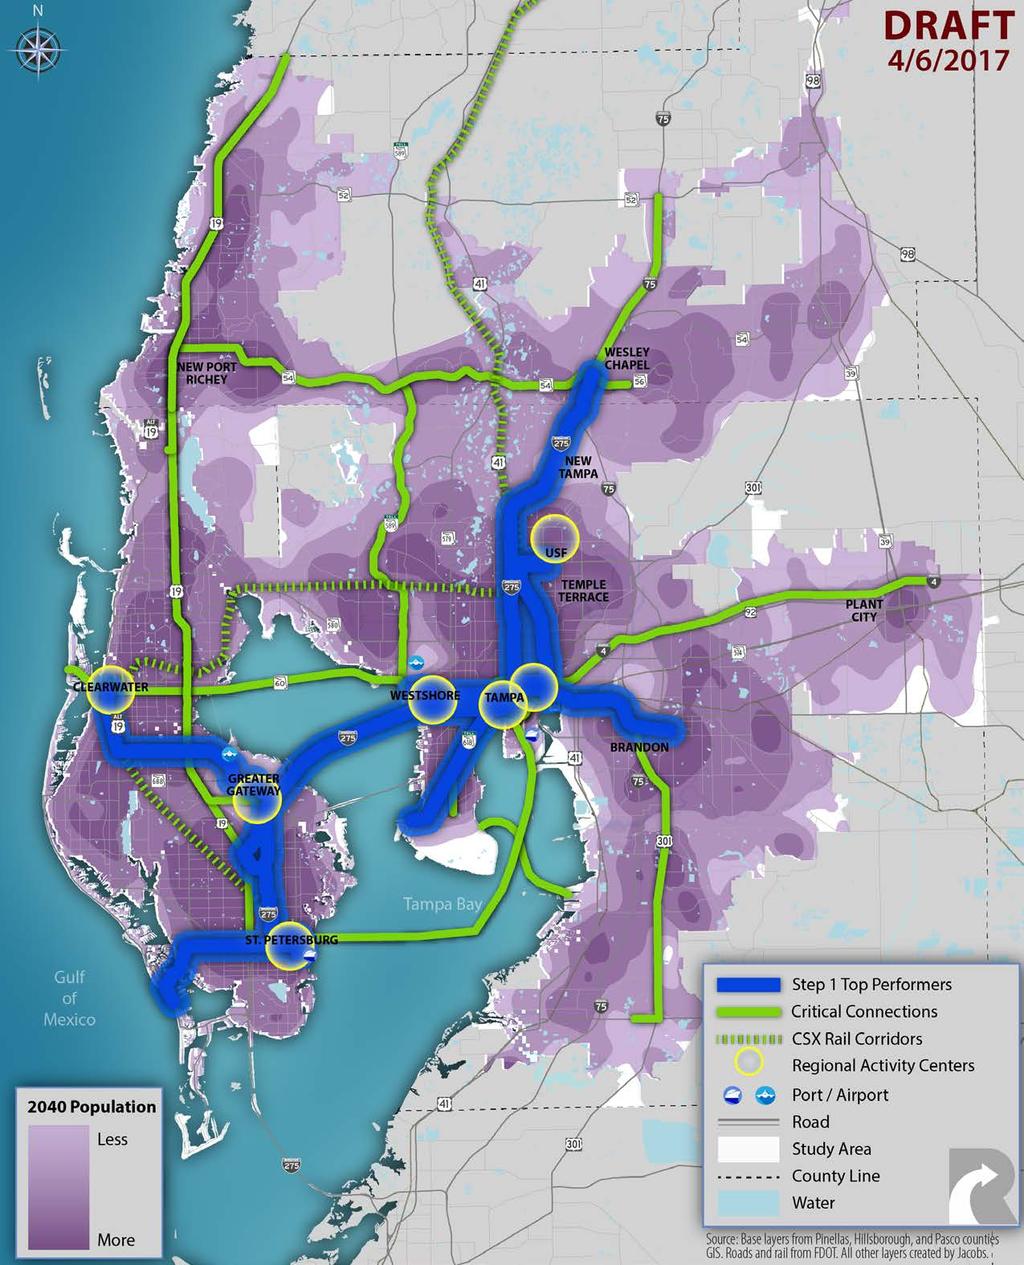 The Vision Network (including Critical Connections) The Vision Network (including Critical Connections) is anticipated to serve approximately 5in10 Or RESIDENTS in Tampa Bay (by 2040) The Top